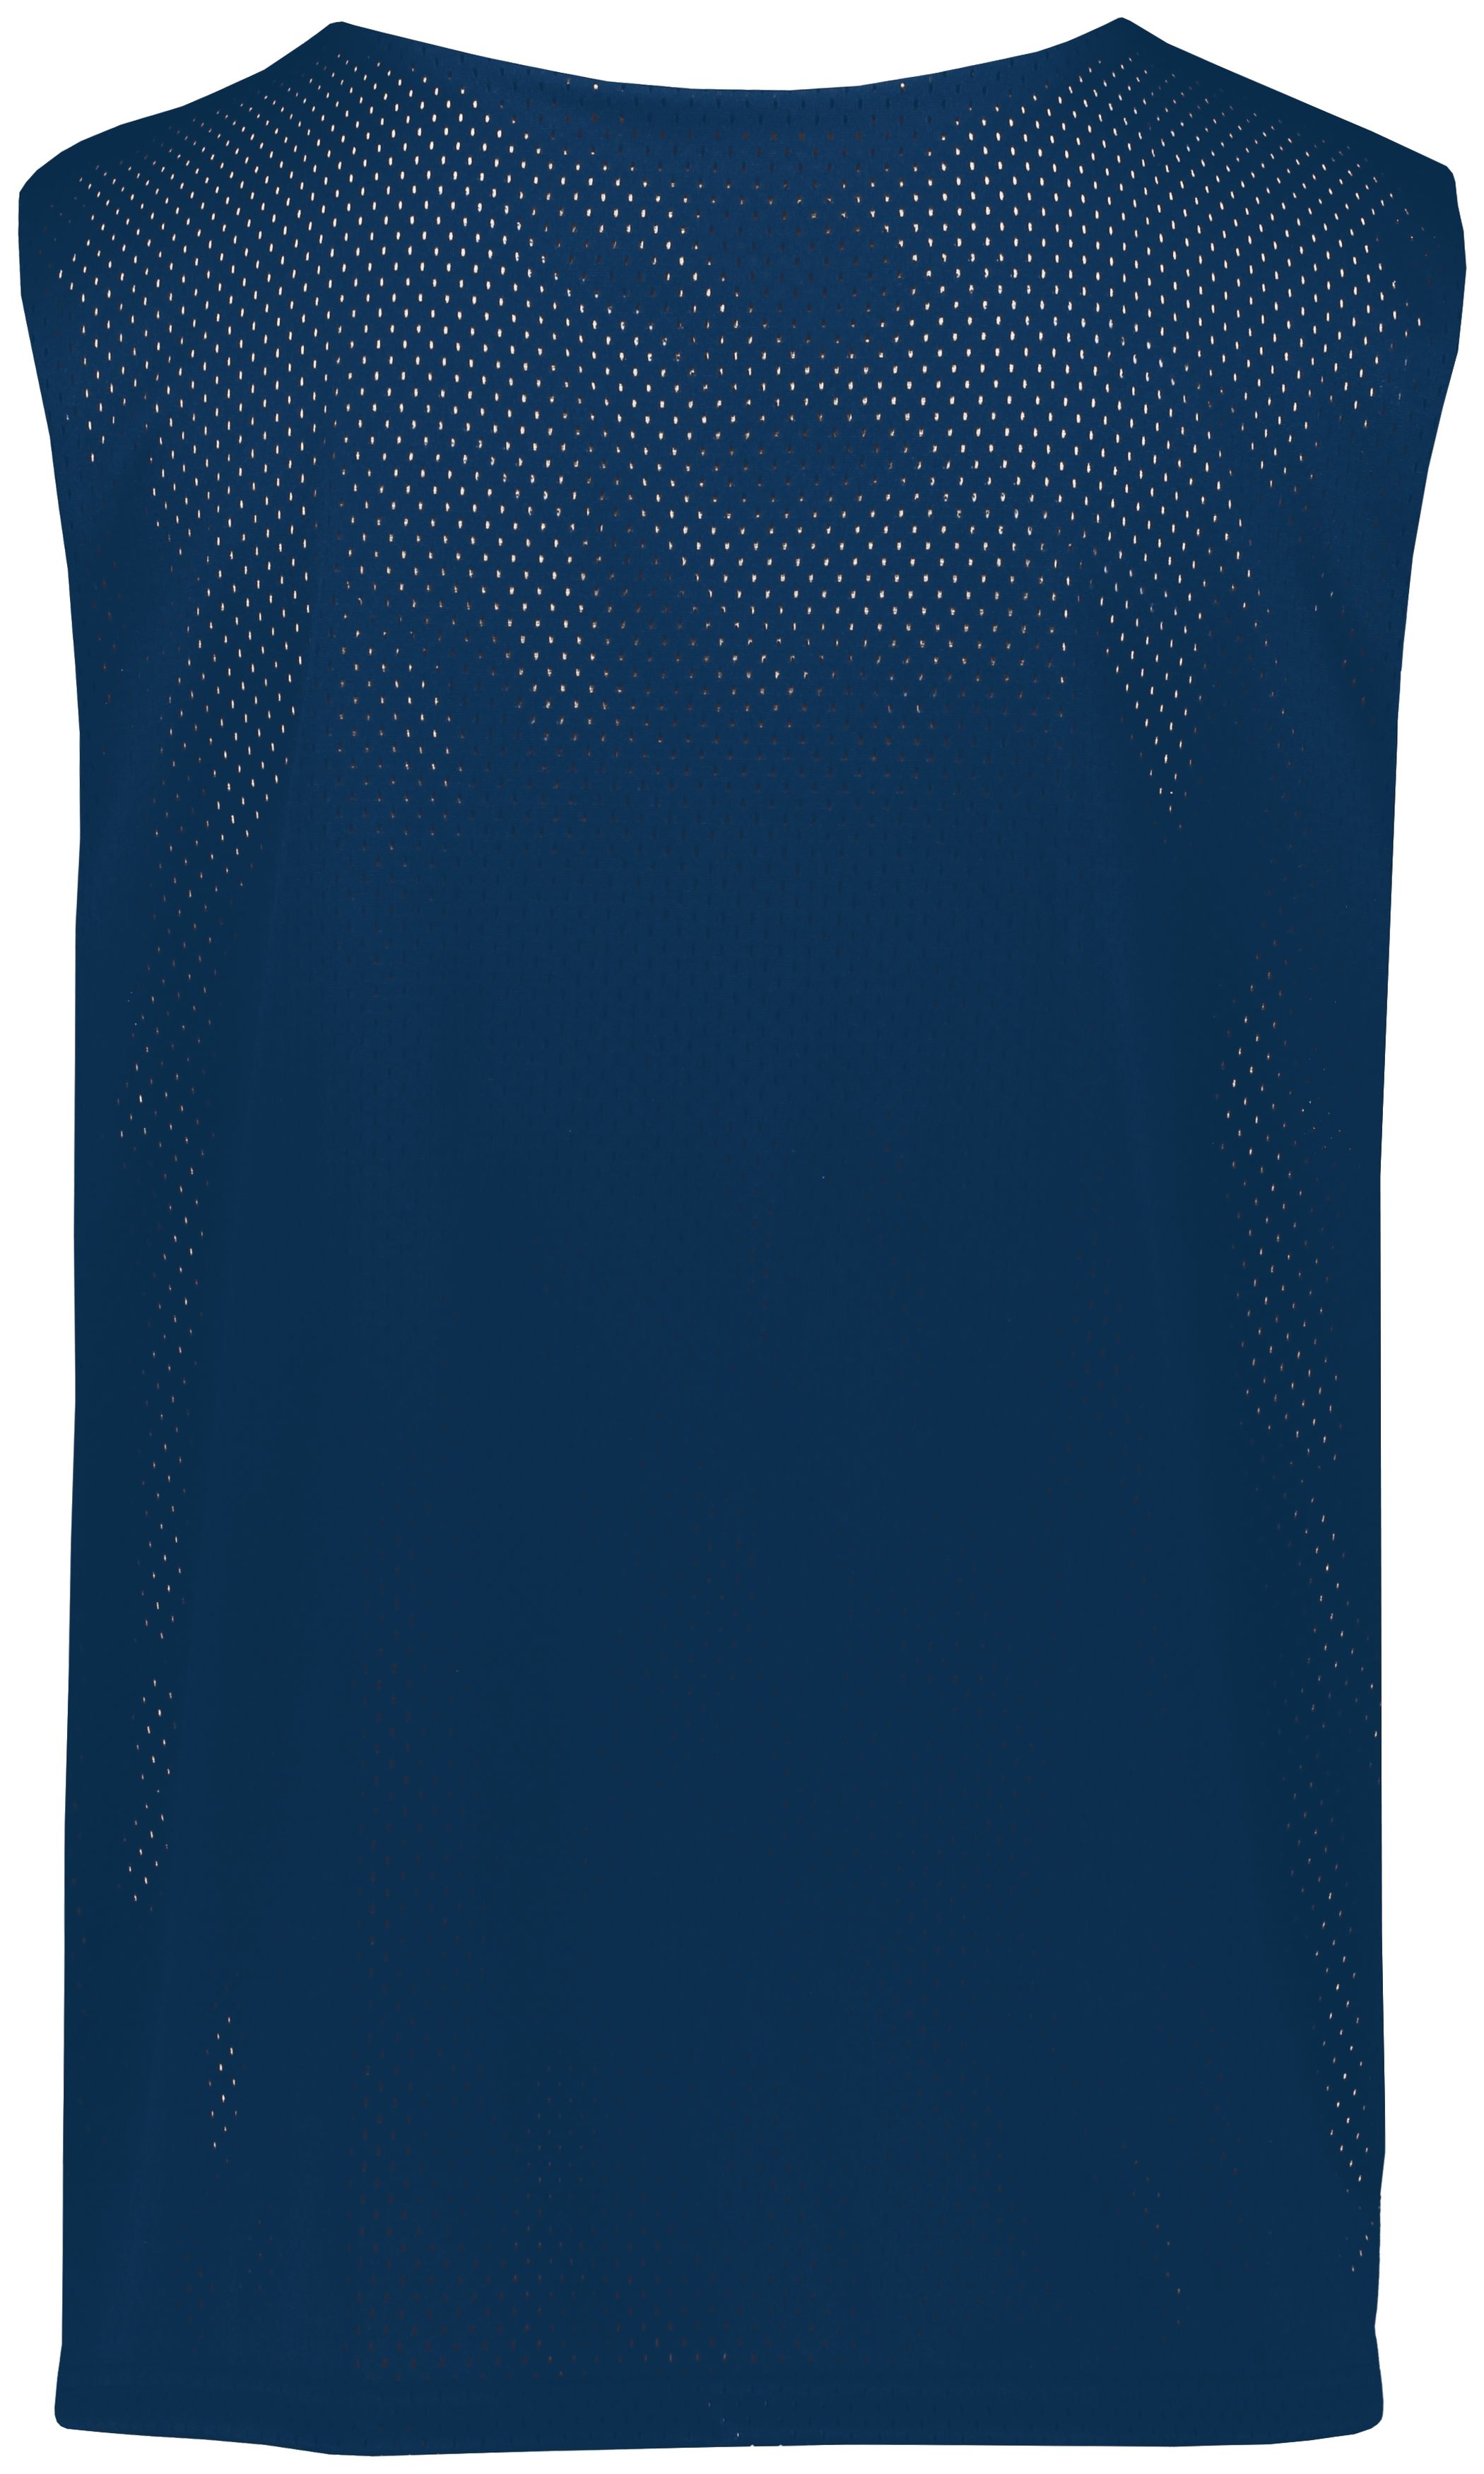 Nike Youth Reversible Pinnie